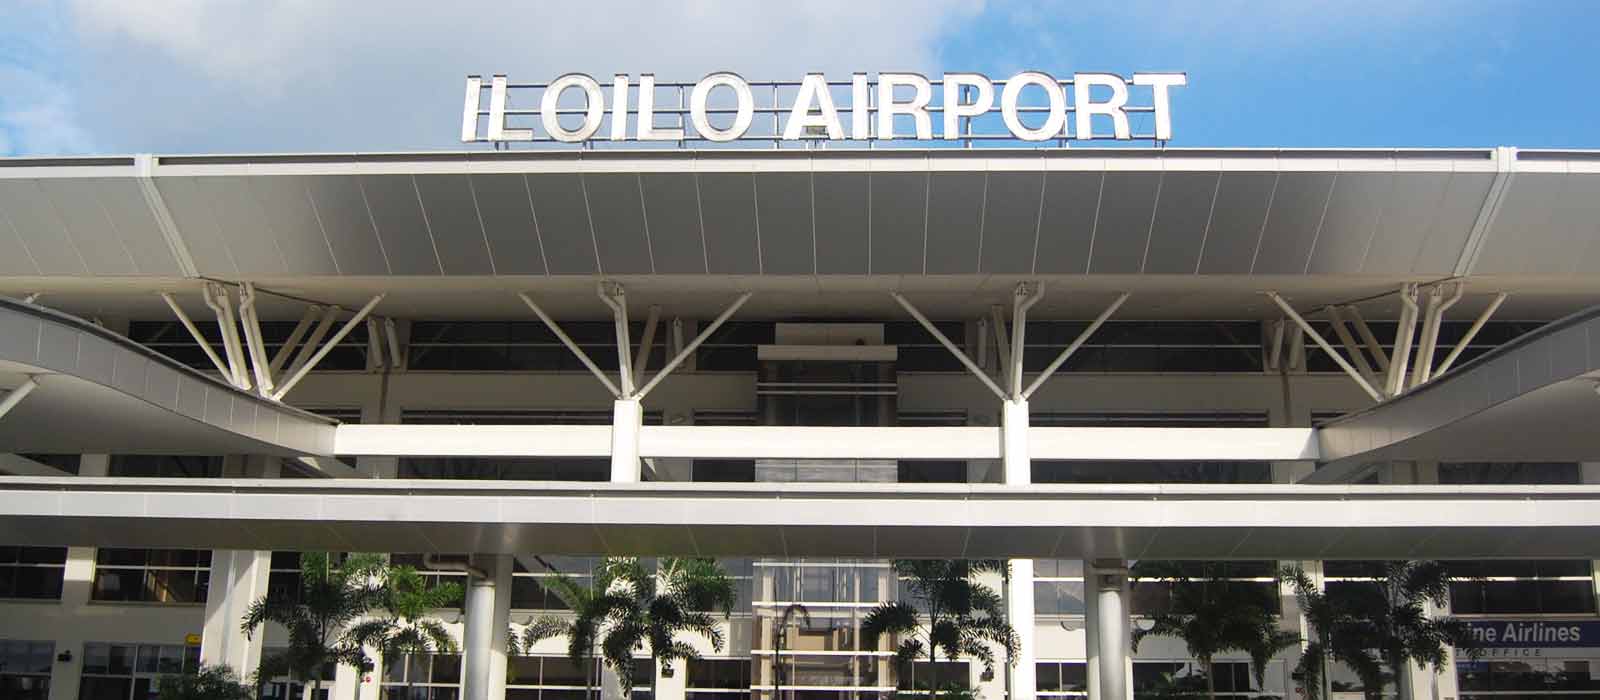 Flights In And Out Of Iloilo Airport Suspended - iloilo airport roblox